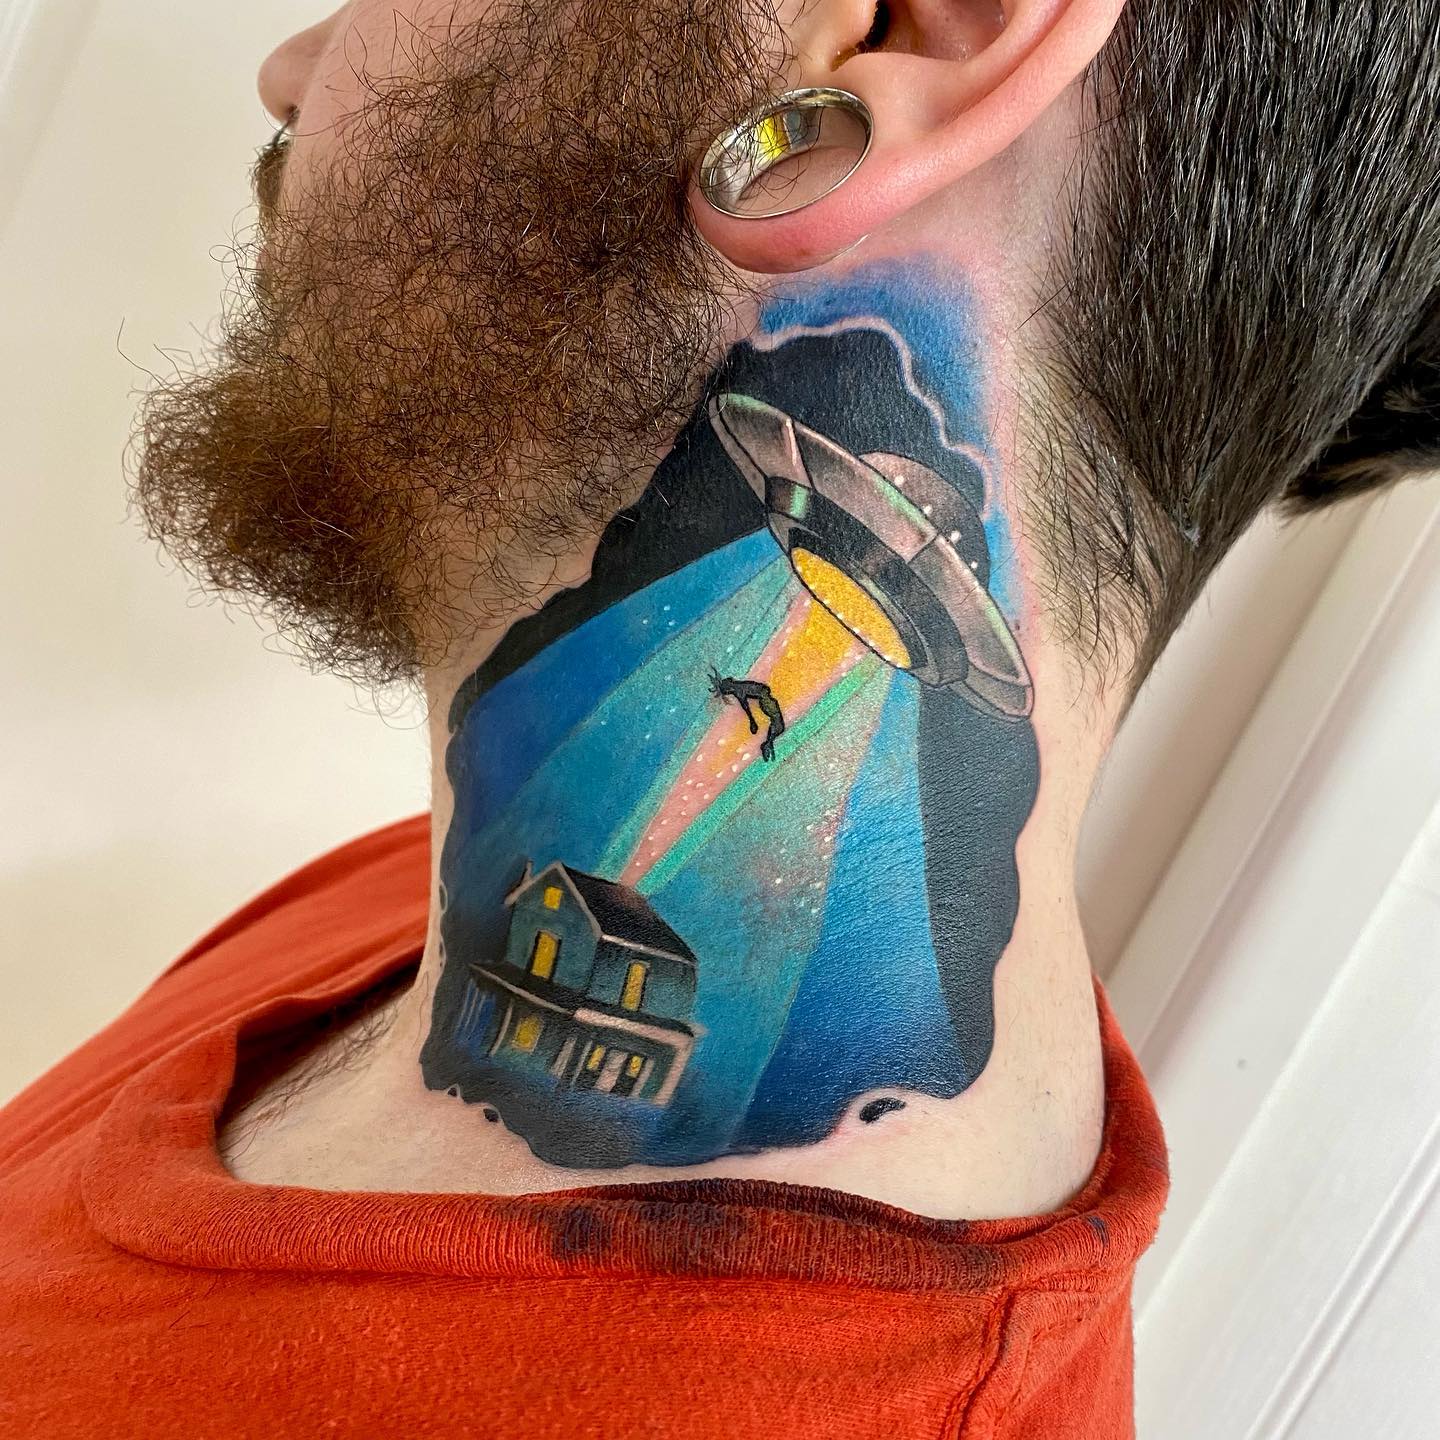 The universe is too big and mysterious that it is impossible to ponder if we, humans, are alone in this whole darkness. If you believe that we are not alone and there is UFO, you demonstrate it on your throat with a colorful and amazing tattoo like the above.